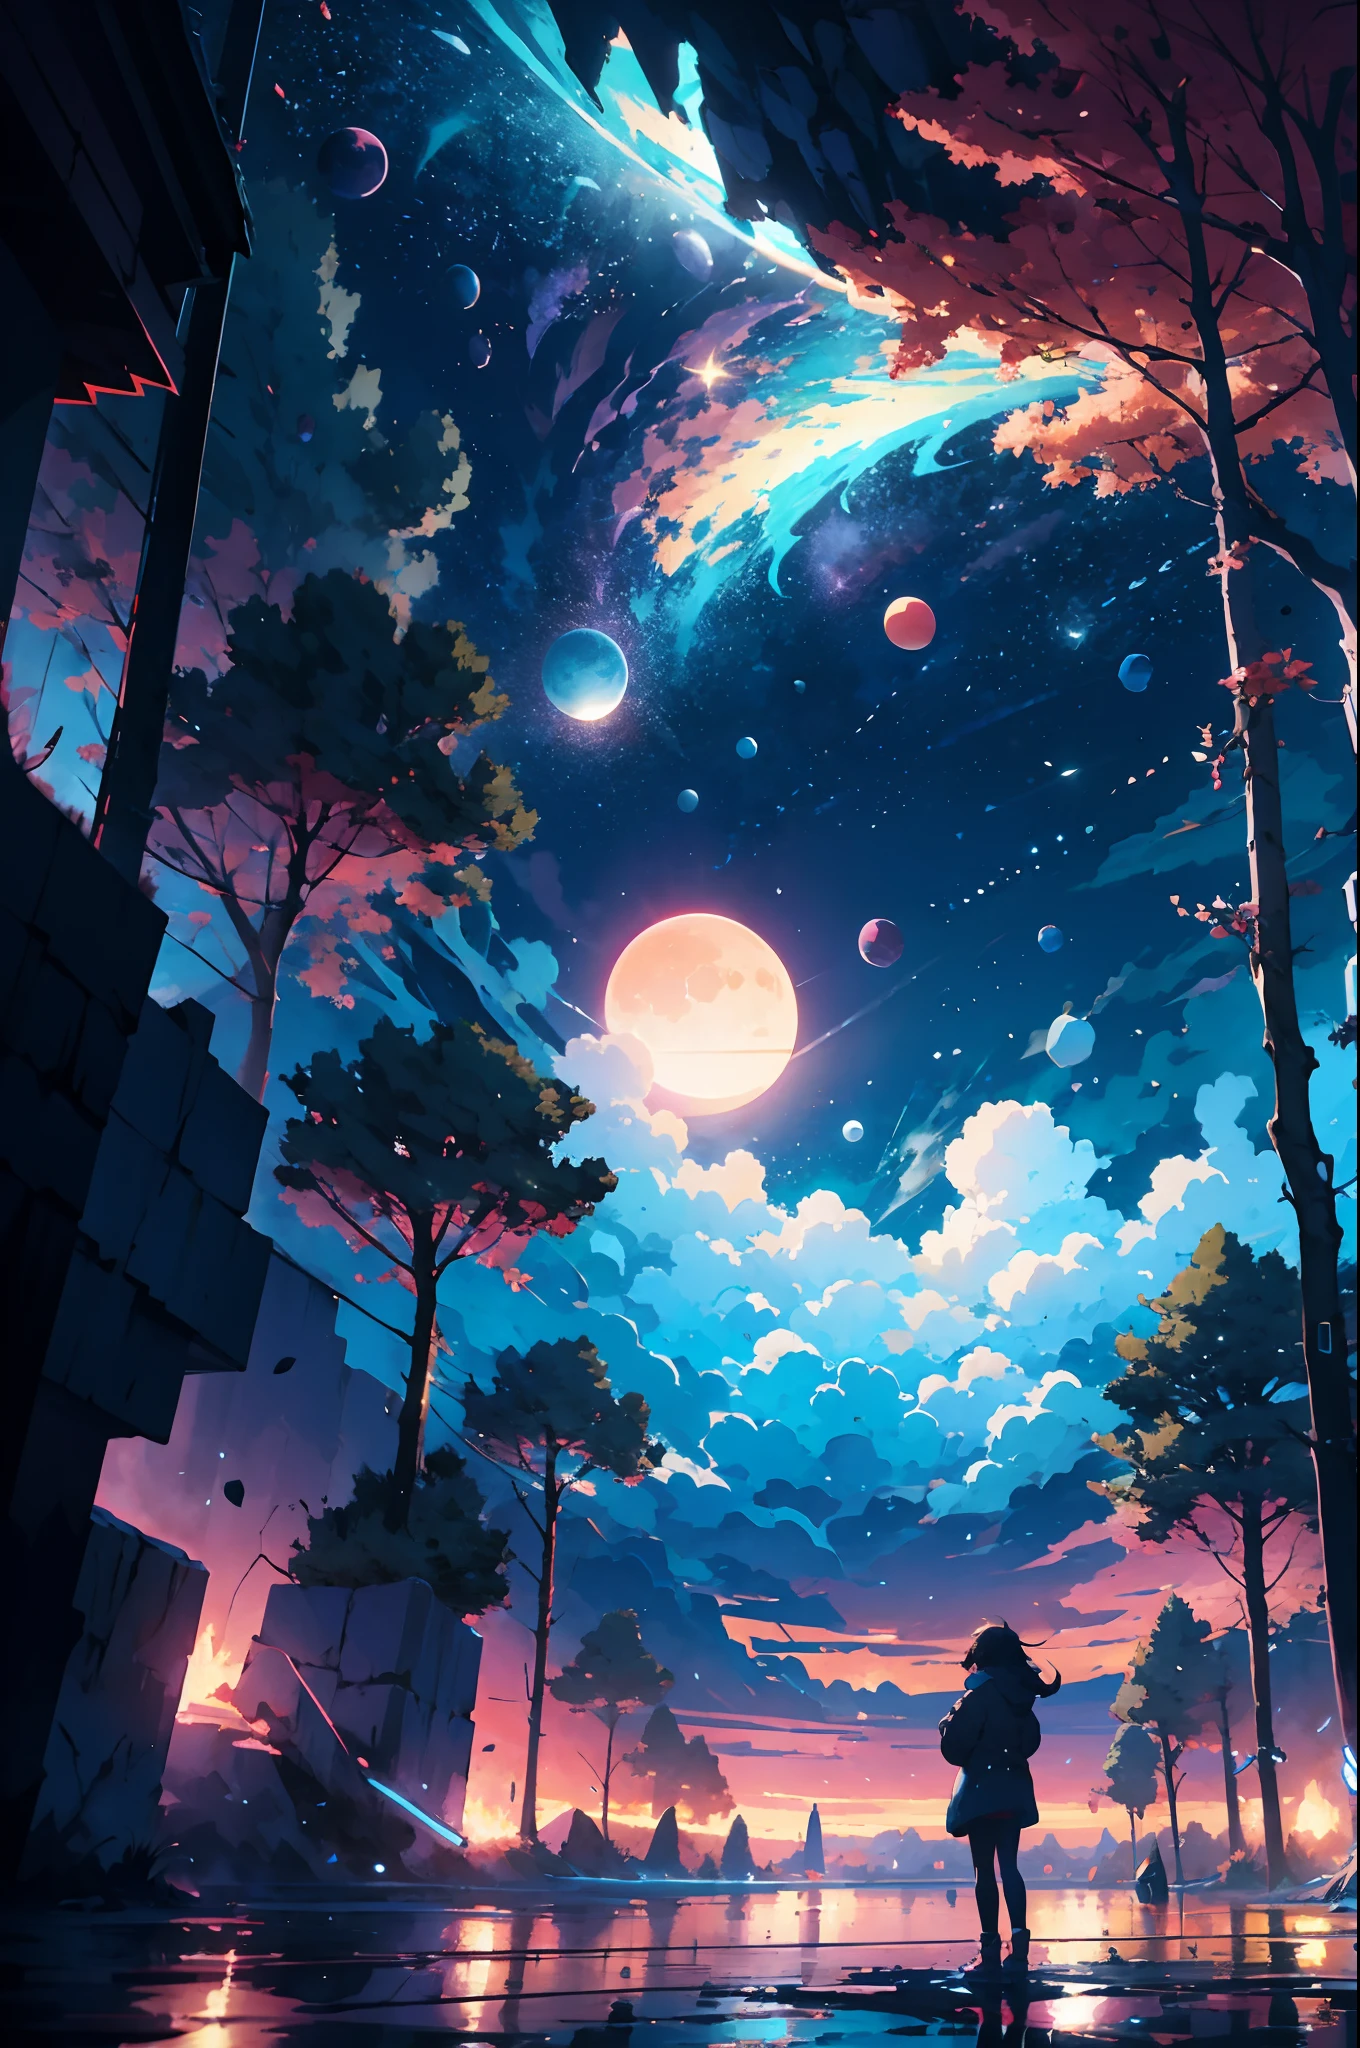 anime girl standing on a rock looking at a star filled night sky, makoto shinkai cyril rolando, anime art wallpaper 4k, anime art wallpaper 4 k, anime art wallpaper 8 k, by makoto shinkai, inspired by Cyril Rolando, in the style dan mumford artwork, amazing wallpaper, by Yuumei